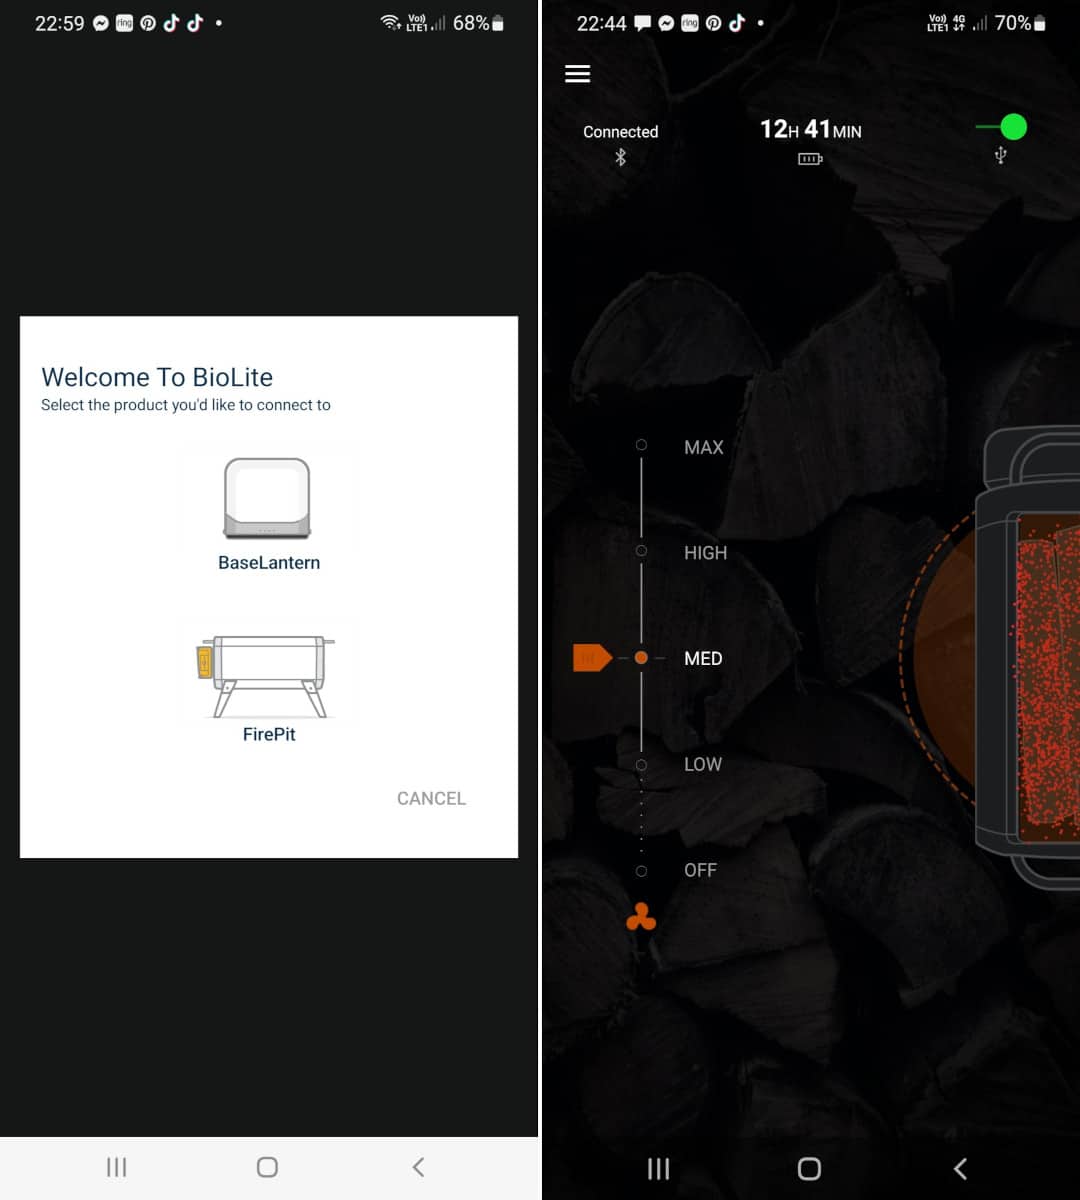 Two BiolIte app screenshots side by side, showing welcome screen, and speed setting with battery life remain.